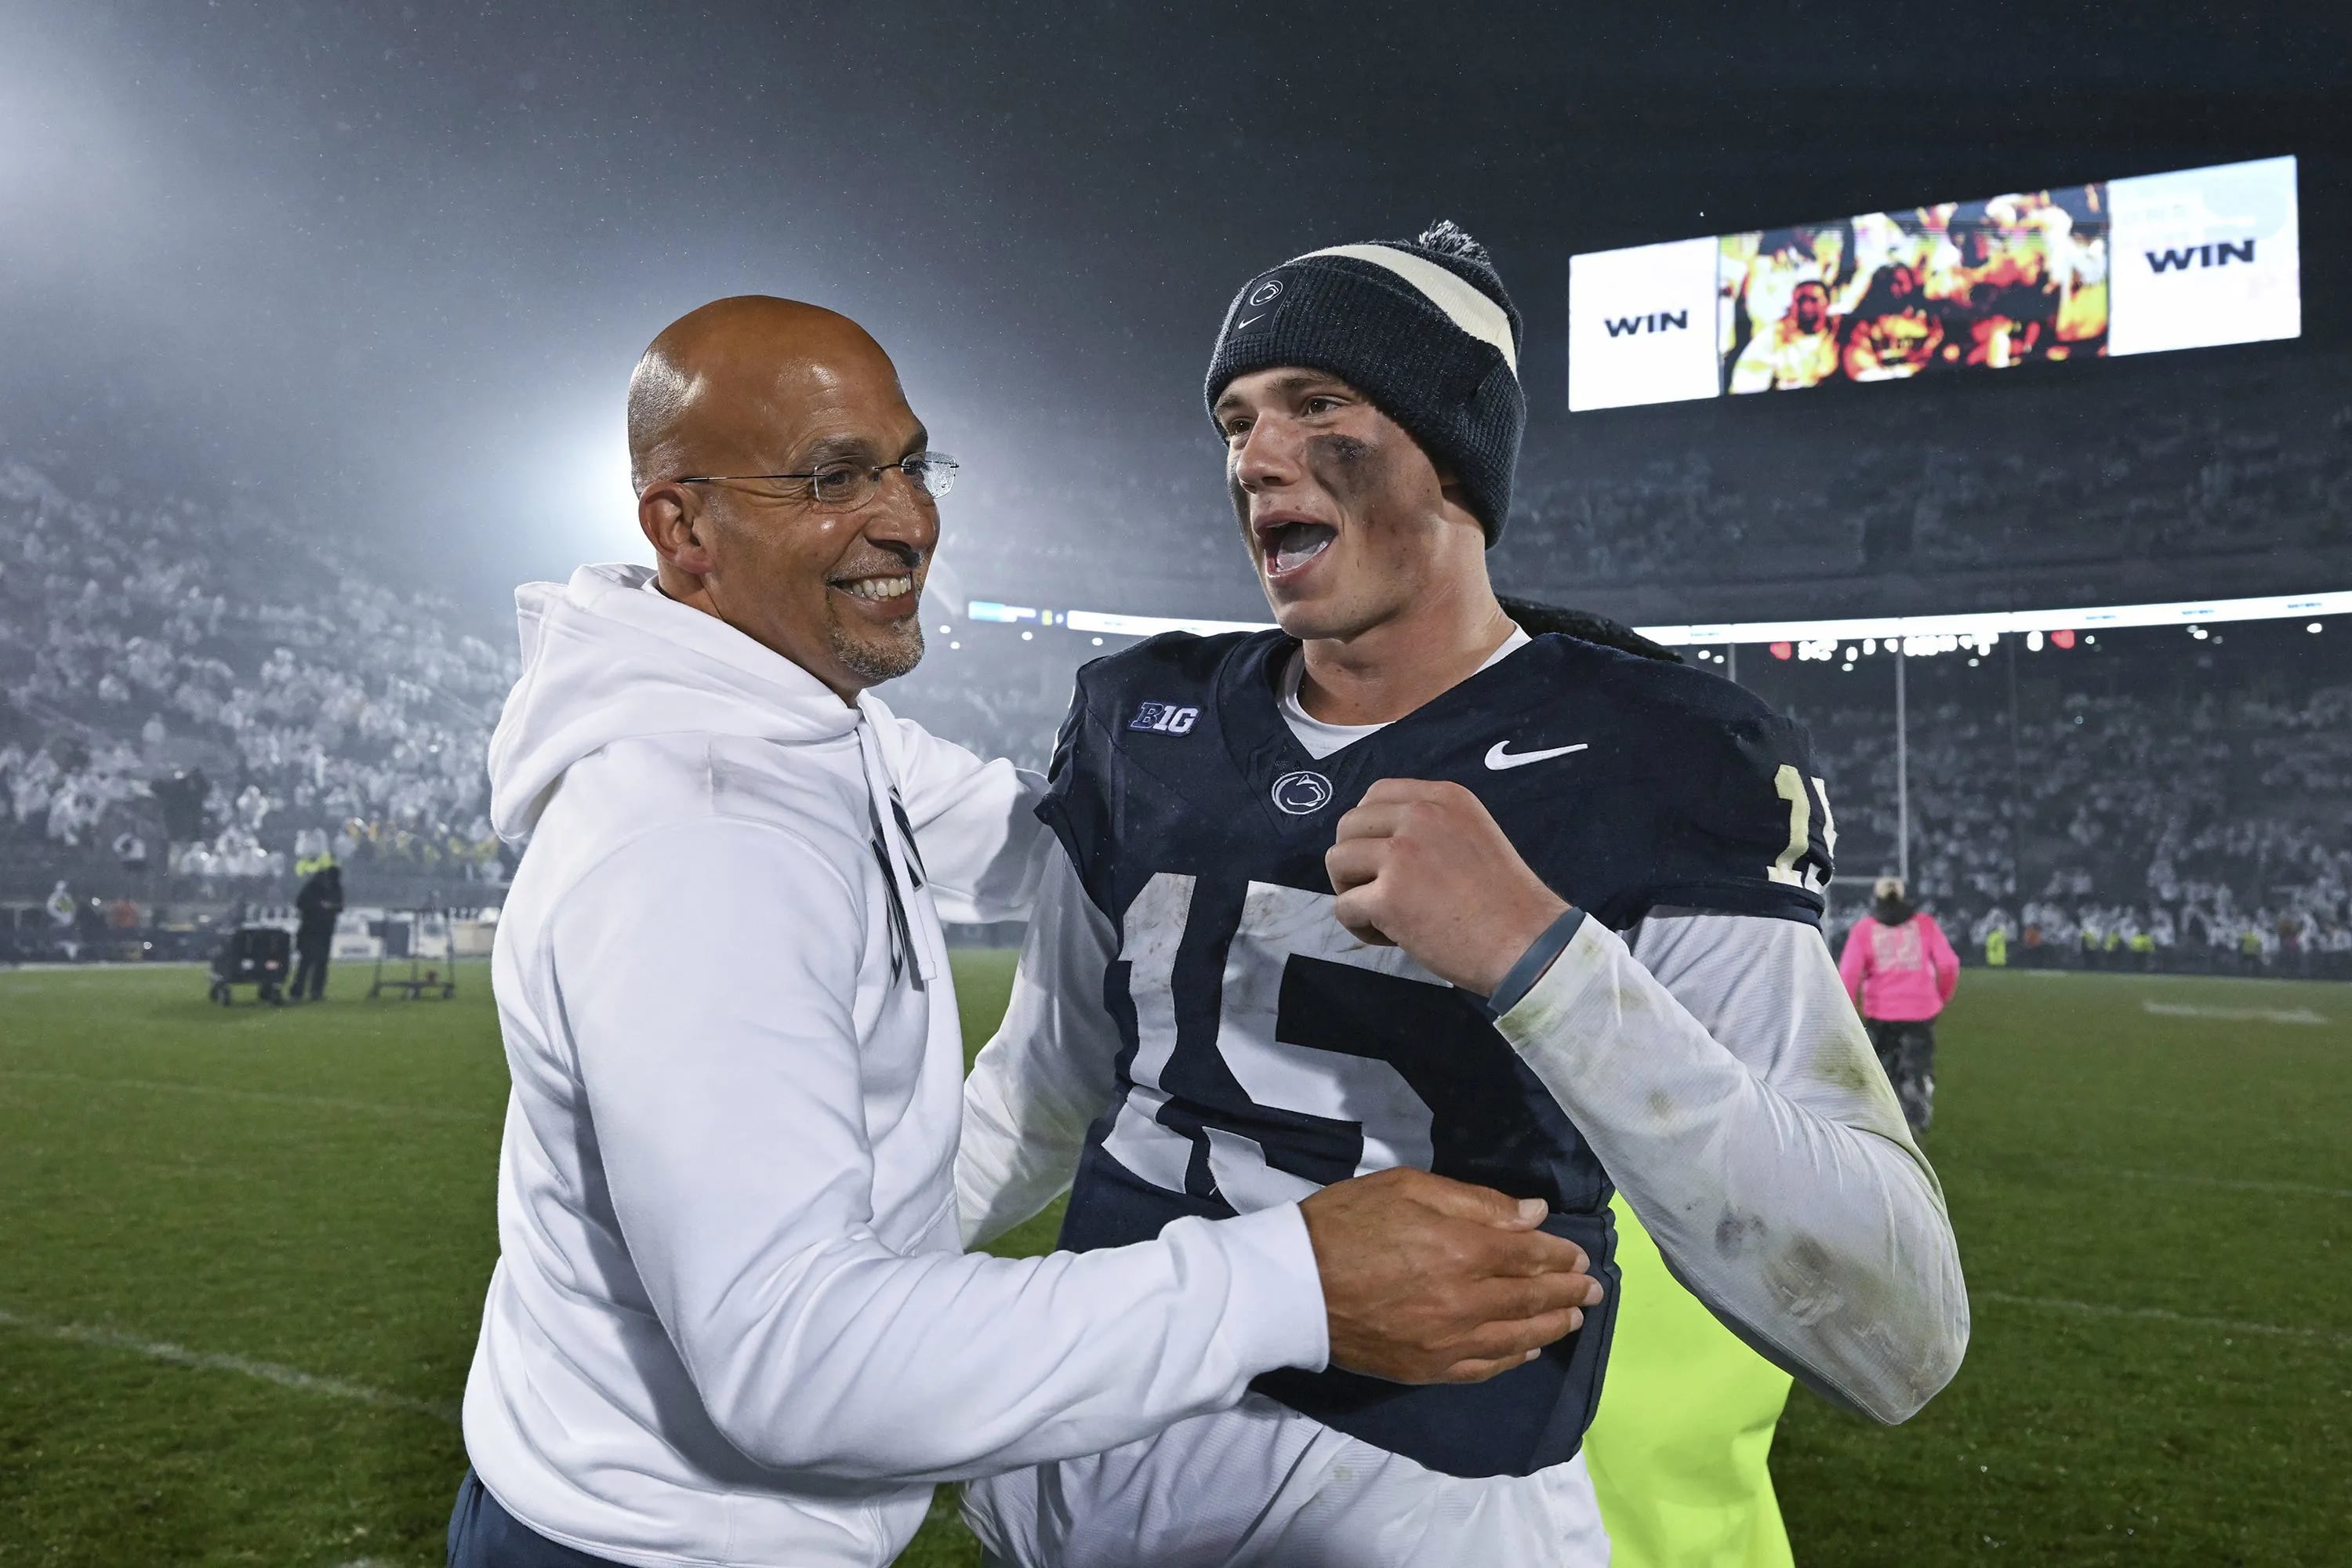 Penn State-Northwestern: Start time, channel, how to watch and stream